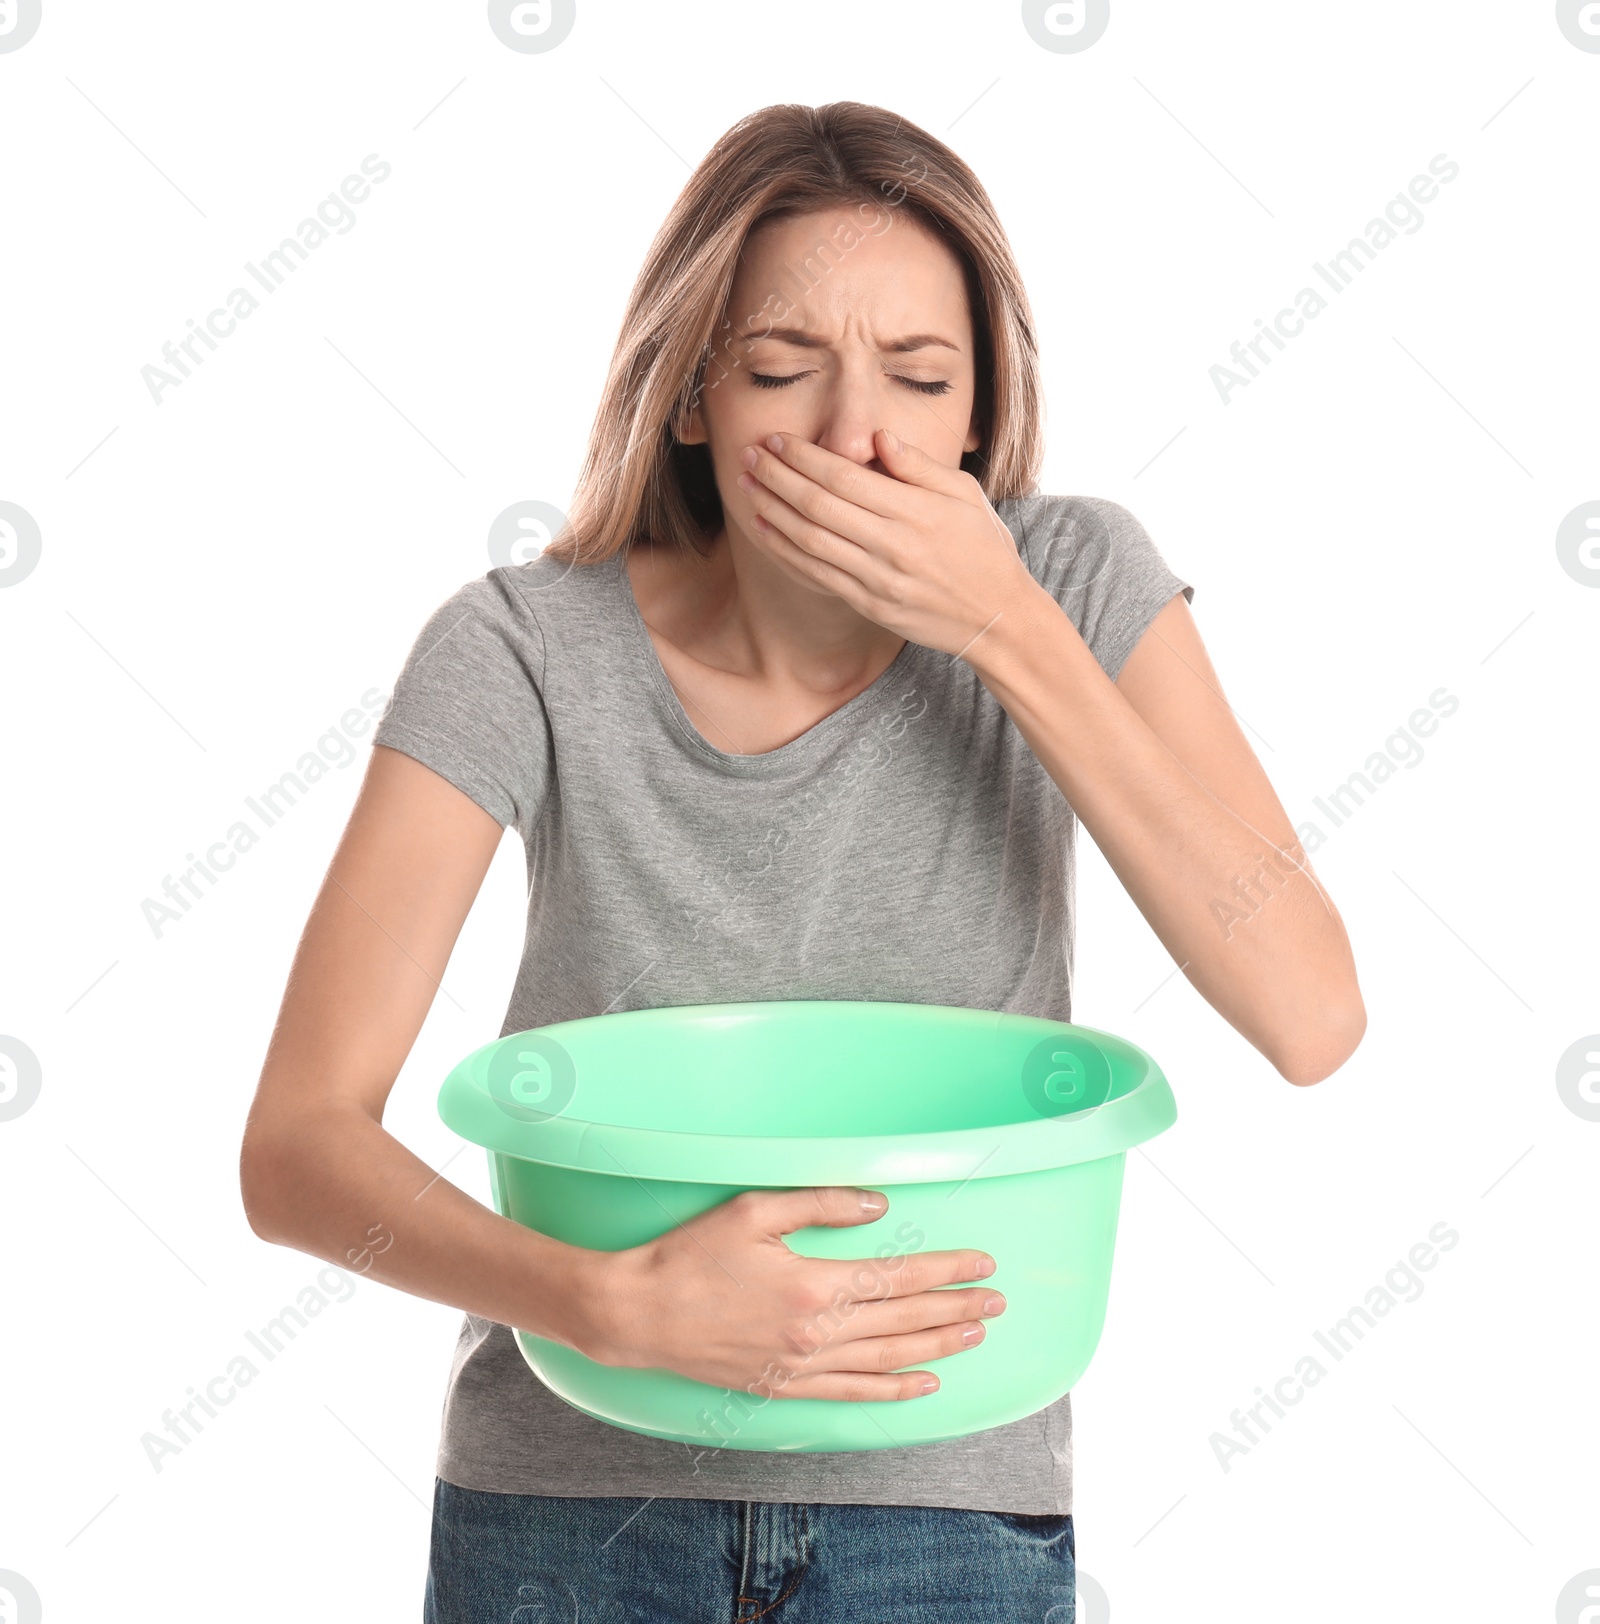 Photo of Woman with basin suffering from nausea on white background. Food poisoning